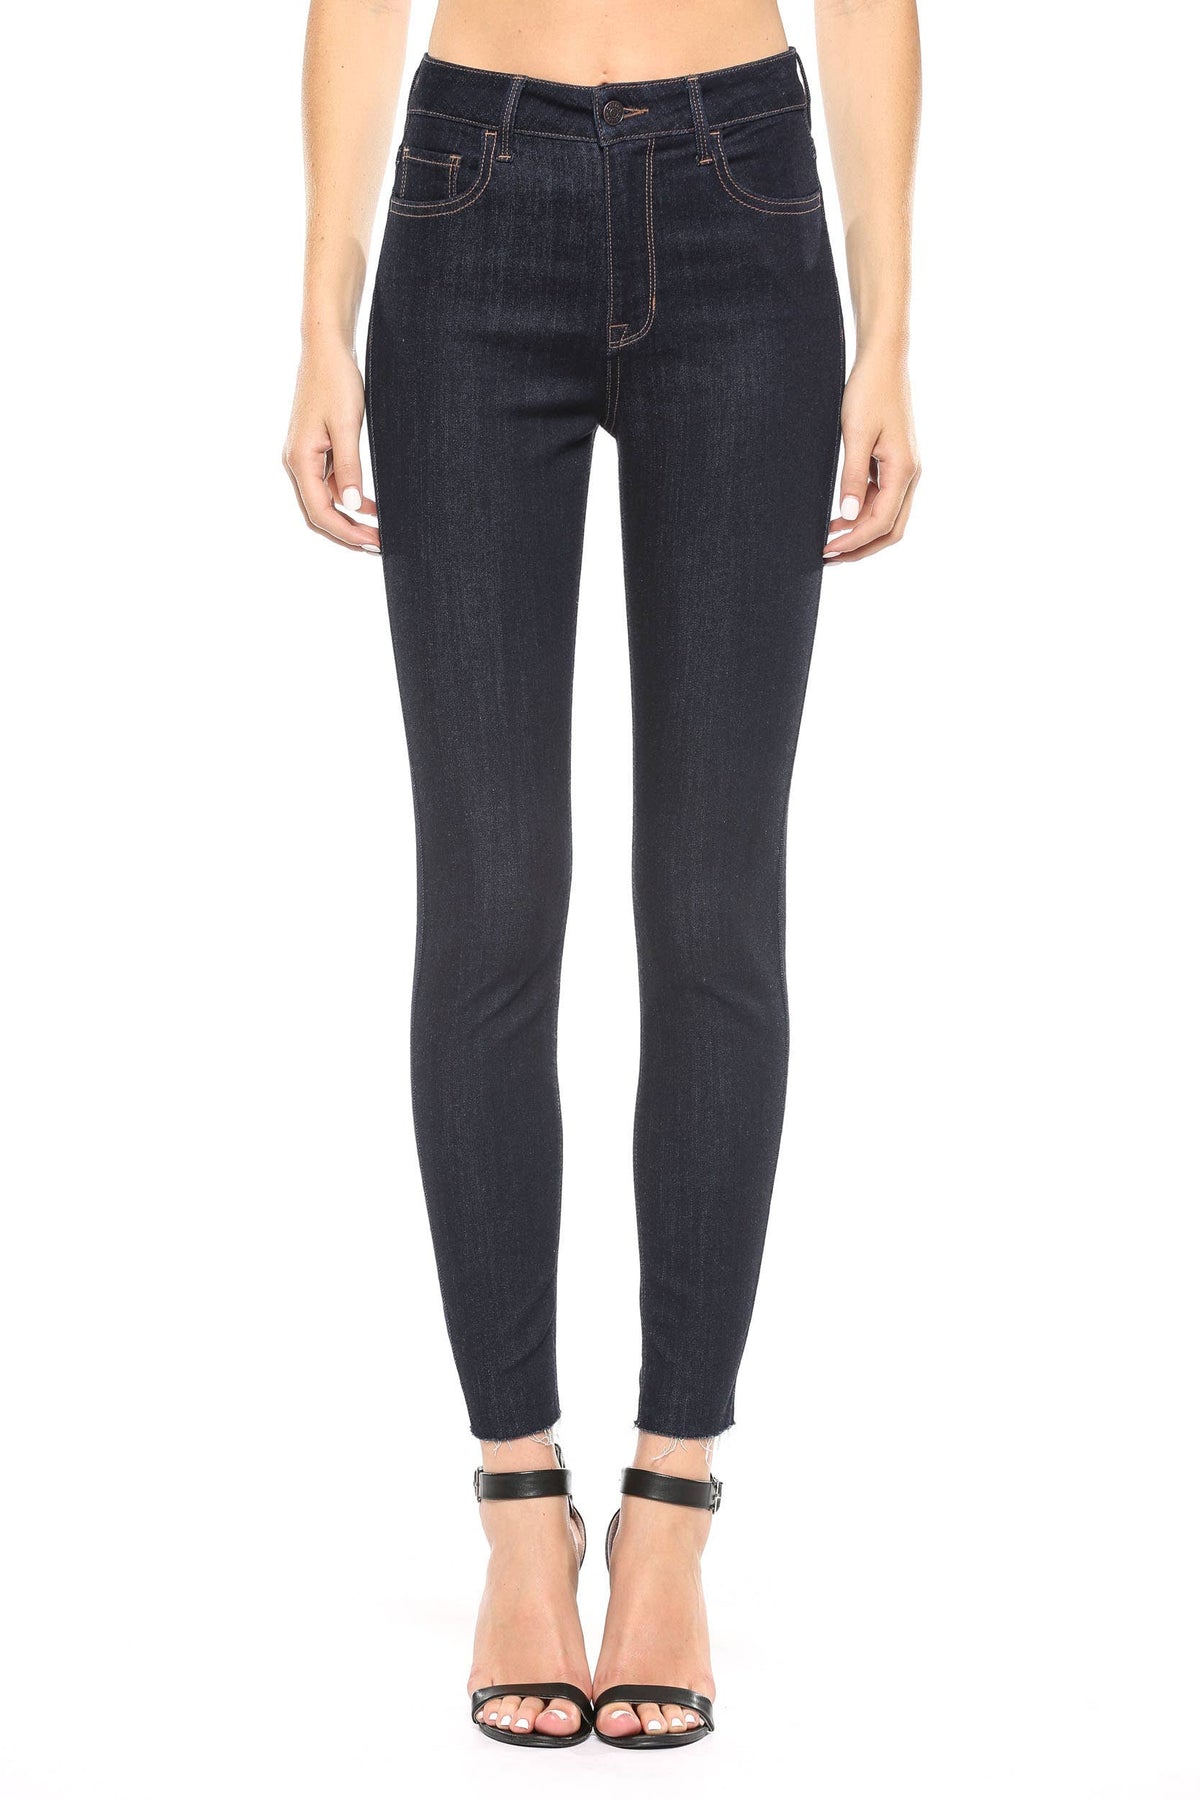 Rich Dark Rinse Skinny Jeans--Lemons and Limes Boutique